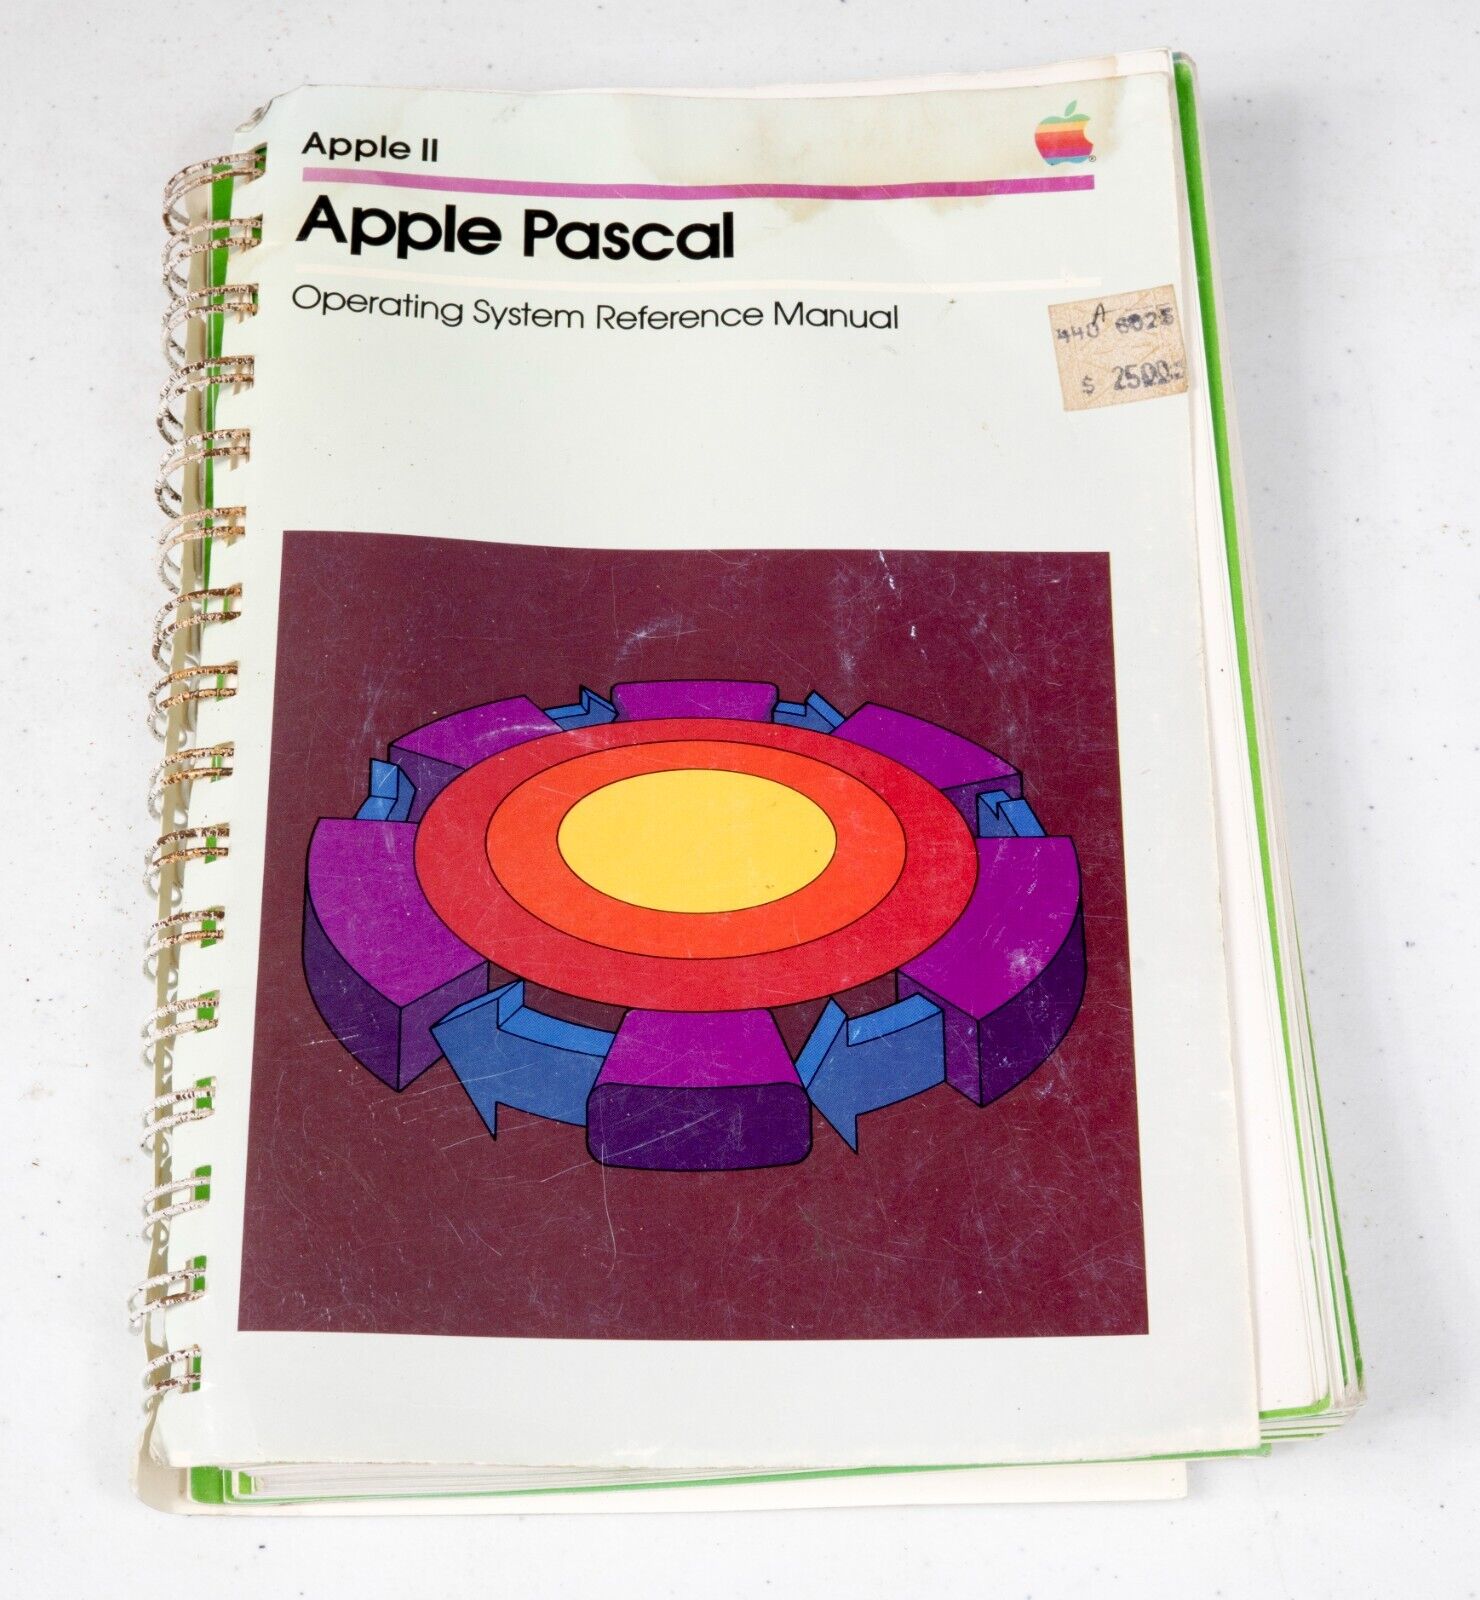 Vintage Apple II Pascal Operating System Reference Manual  030-0100-00 ST534B1